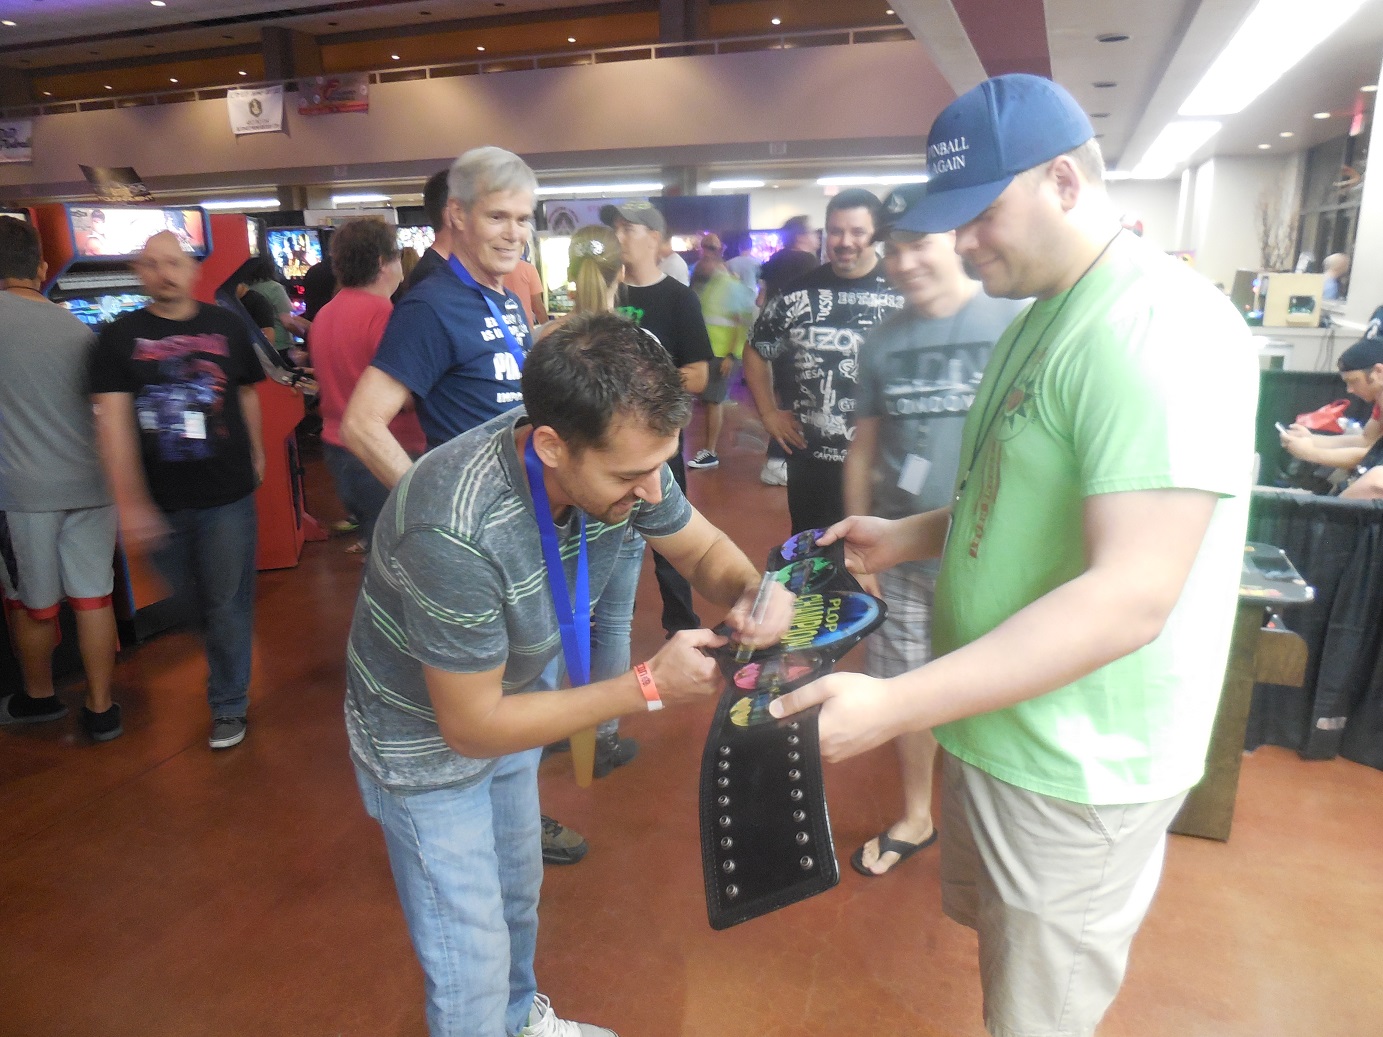 Here's the lucky guy who got to take the belt home, James Kleve, signing the belt for posterity. His brother and father took the other two top spots. This family knows pinball!